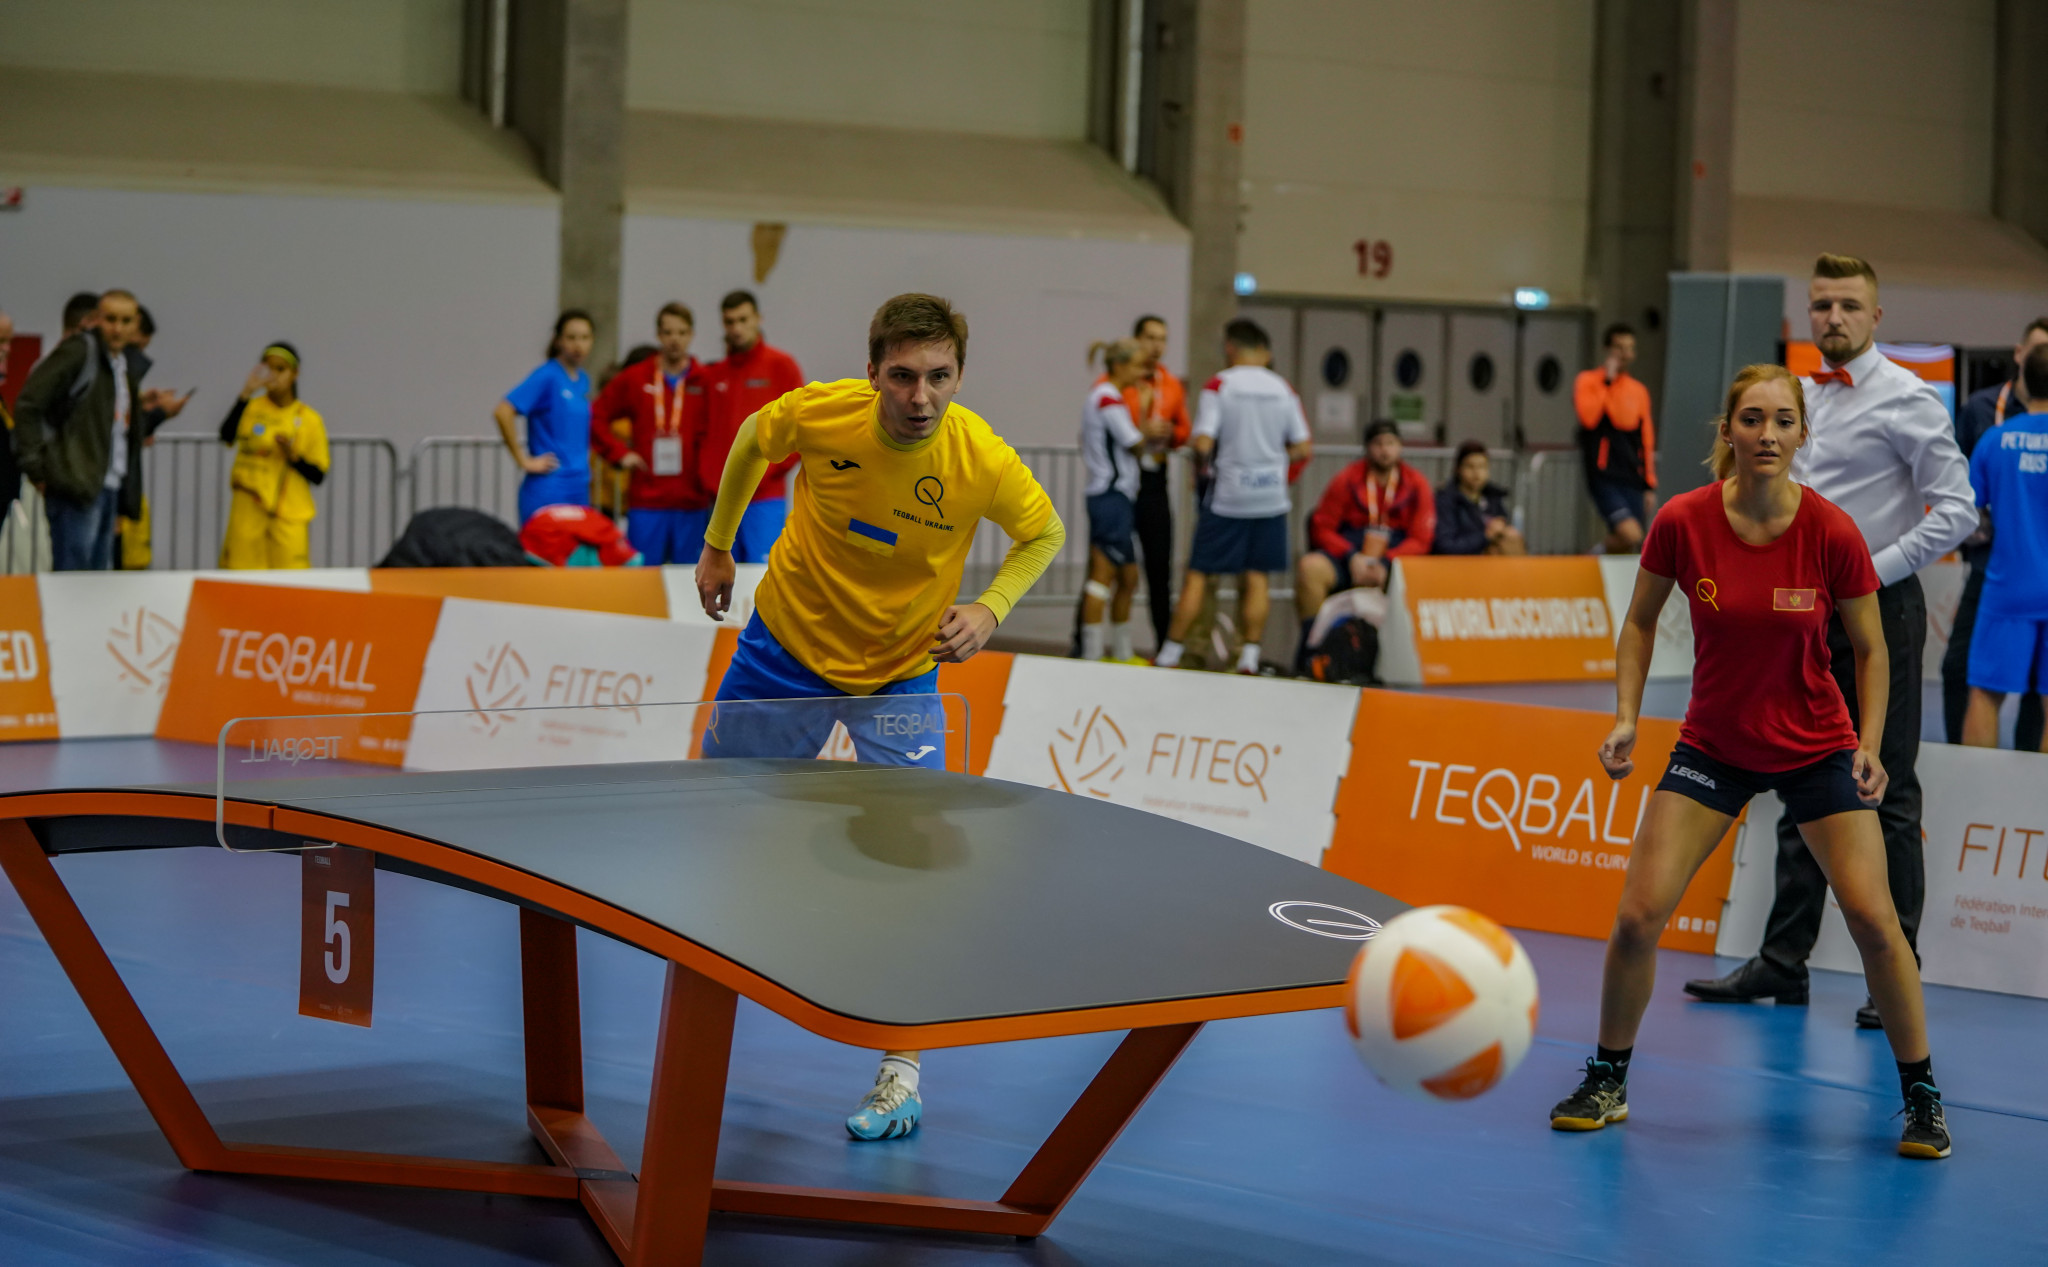 Teqball is an extremely inclusive game, with men and women often pitted against eachother ©FITEQ